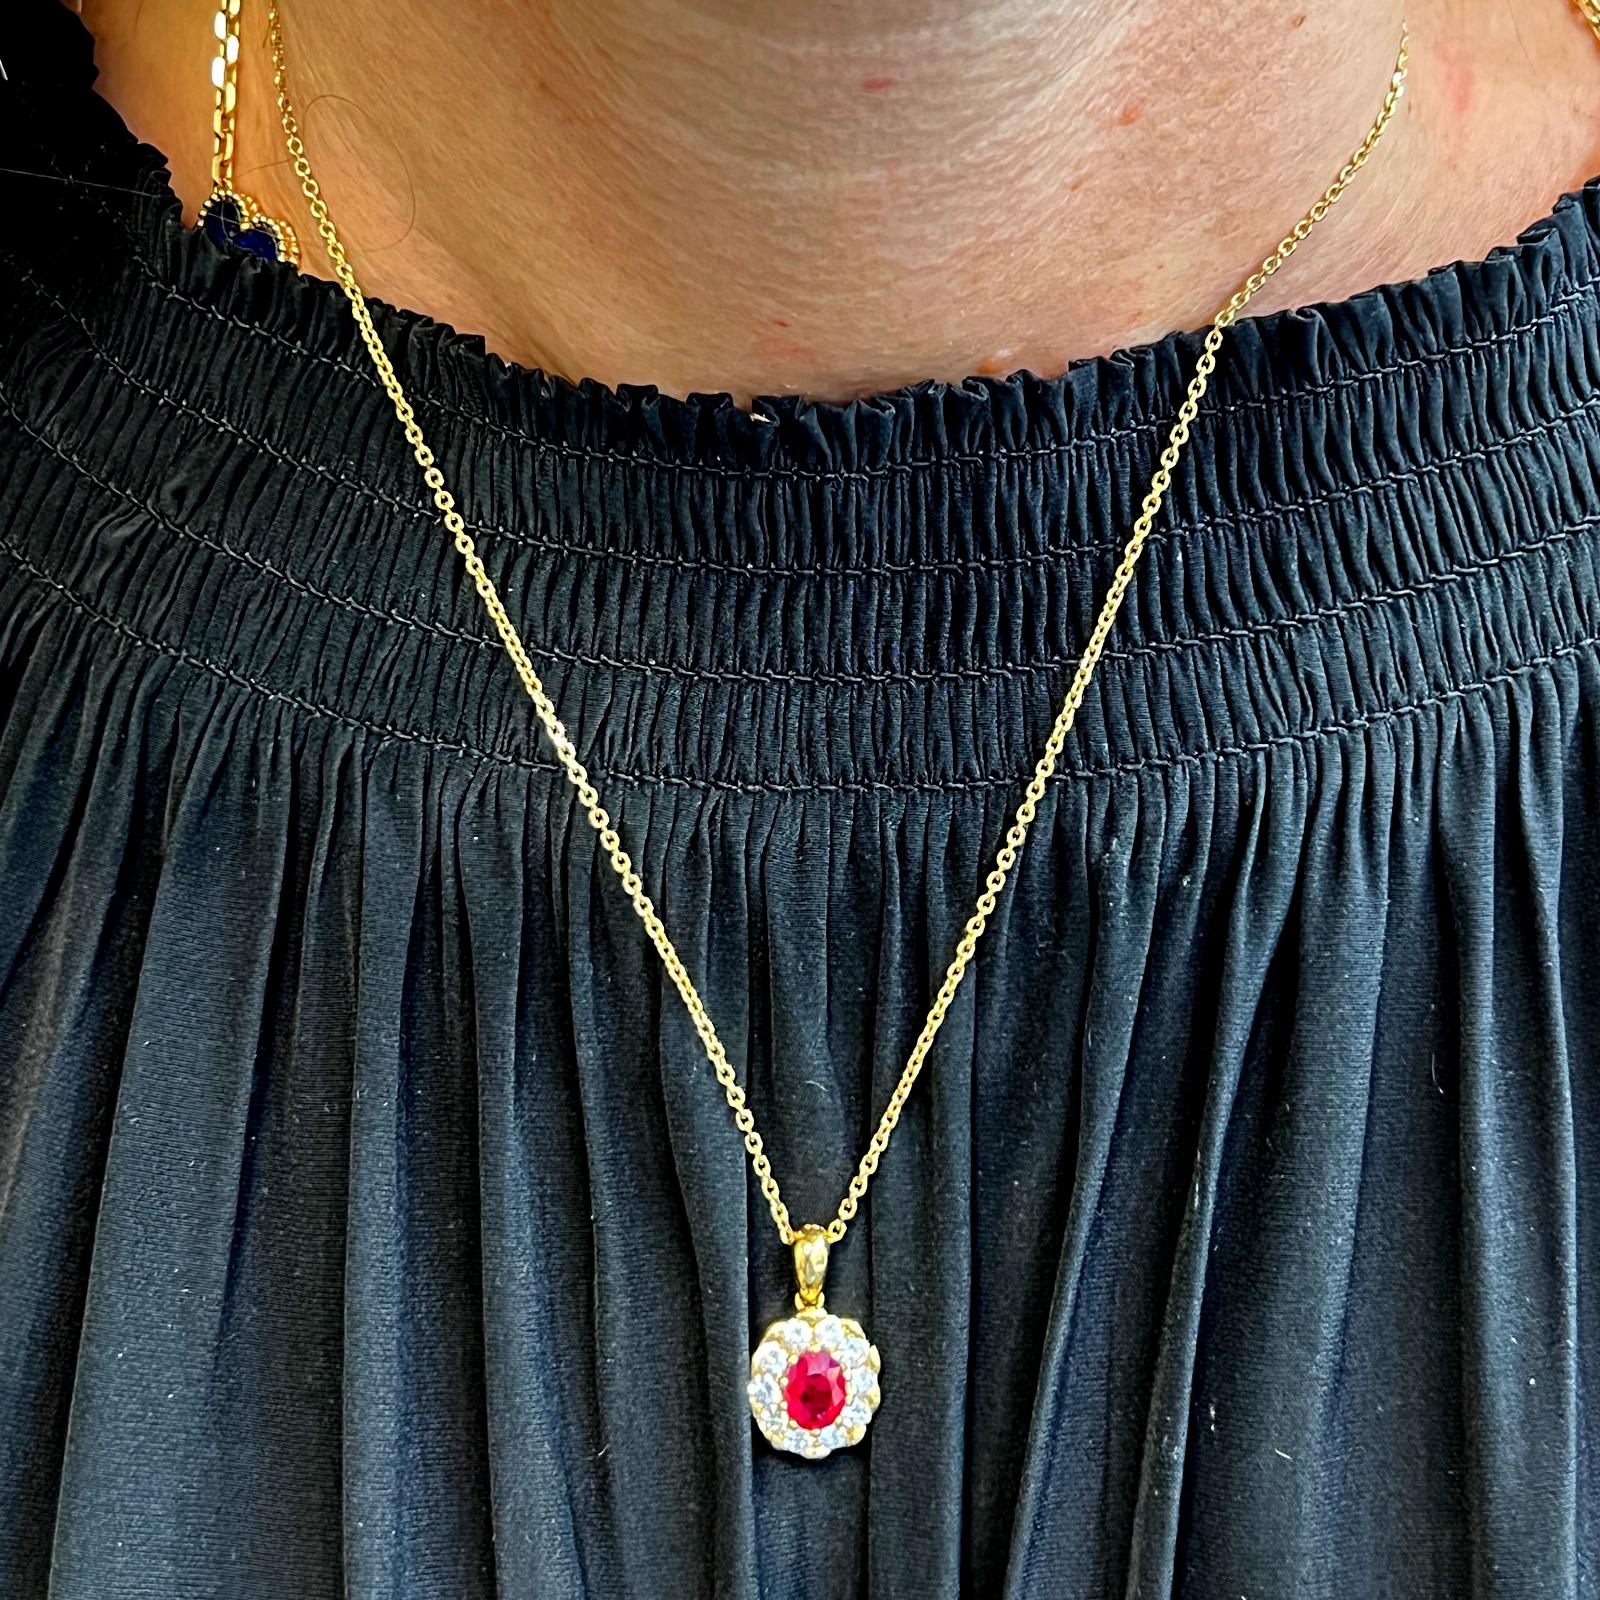 Beautiful Burma Ruby and diamond pendant crafted in 18 karat yellow gold. The oval 1.14 carat Burma ruby is certified by the AGL to be of Burma origin and to have minor heat residue. The vibrant ruby is surrounded by 10 round brilliant cut diamonds